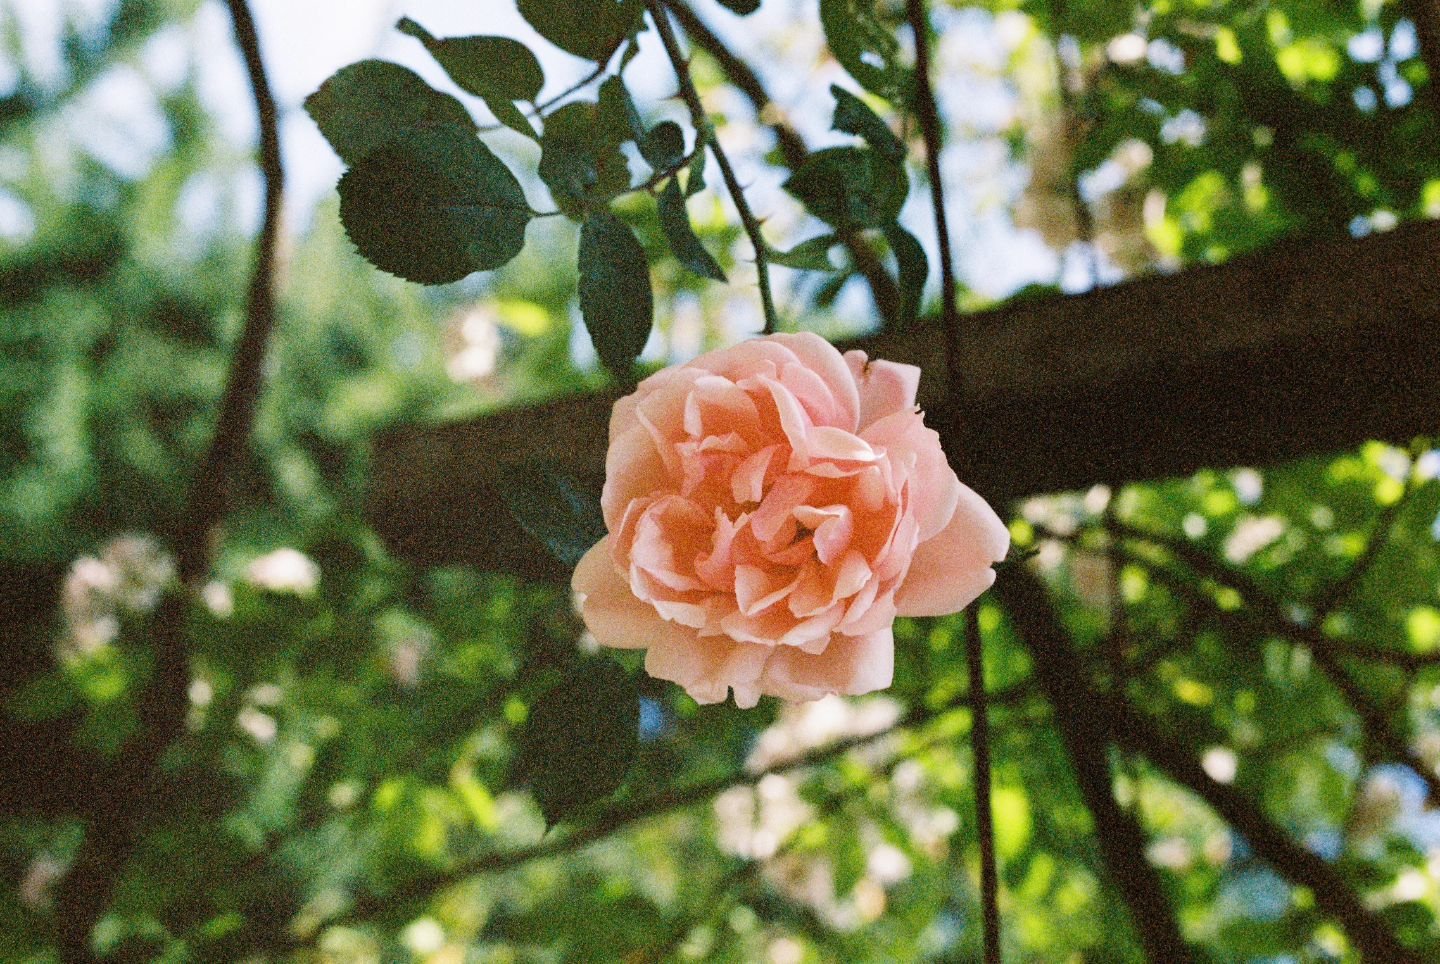 The snow will disappear, and the flowers will bloom again. In the meantime, enjoy these beautiful film photos from my trip to the Rose Garden in Stanley Park last June.